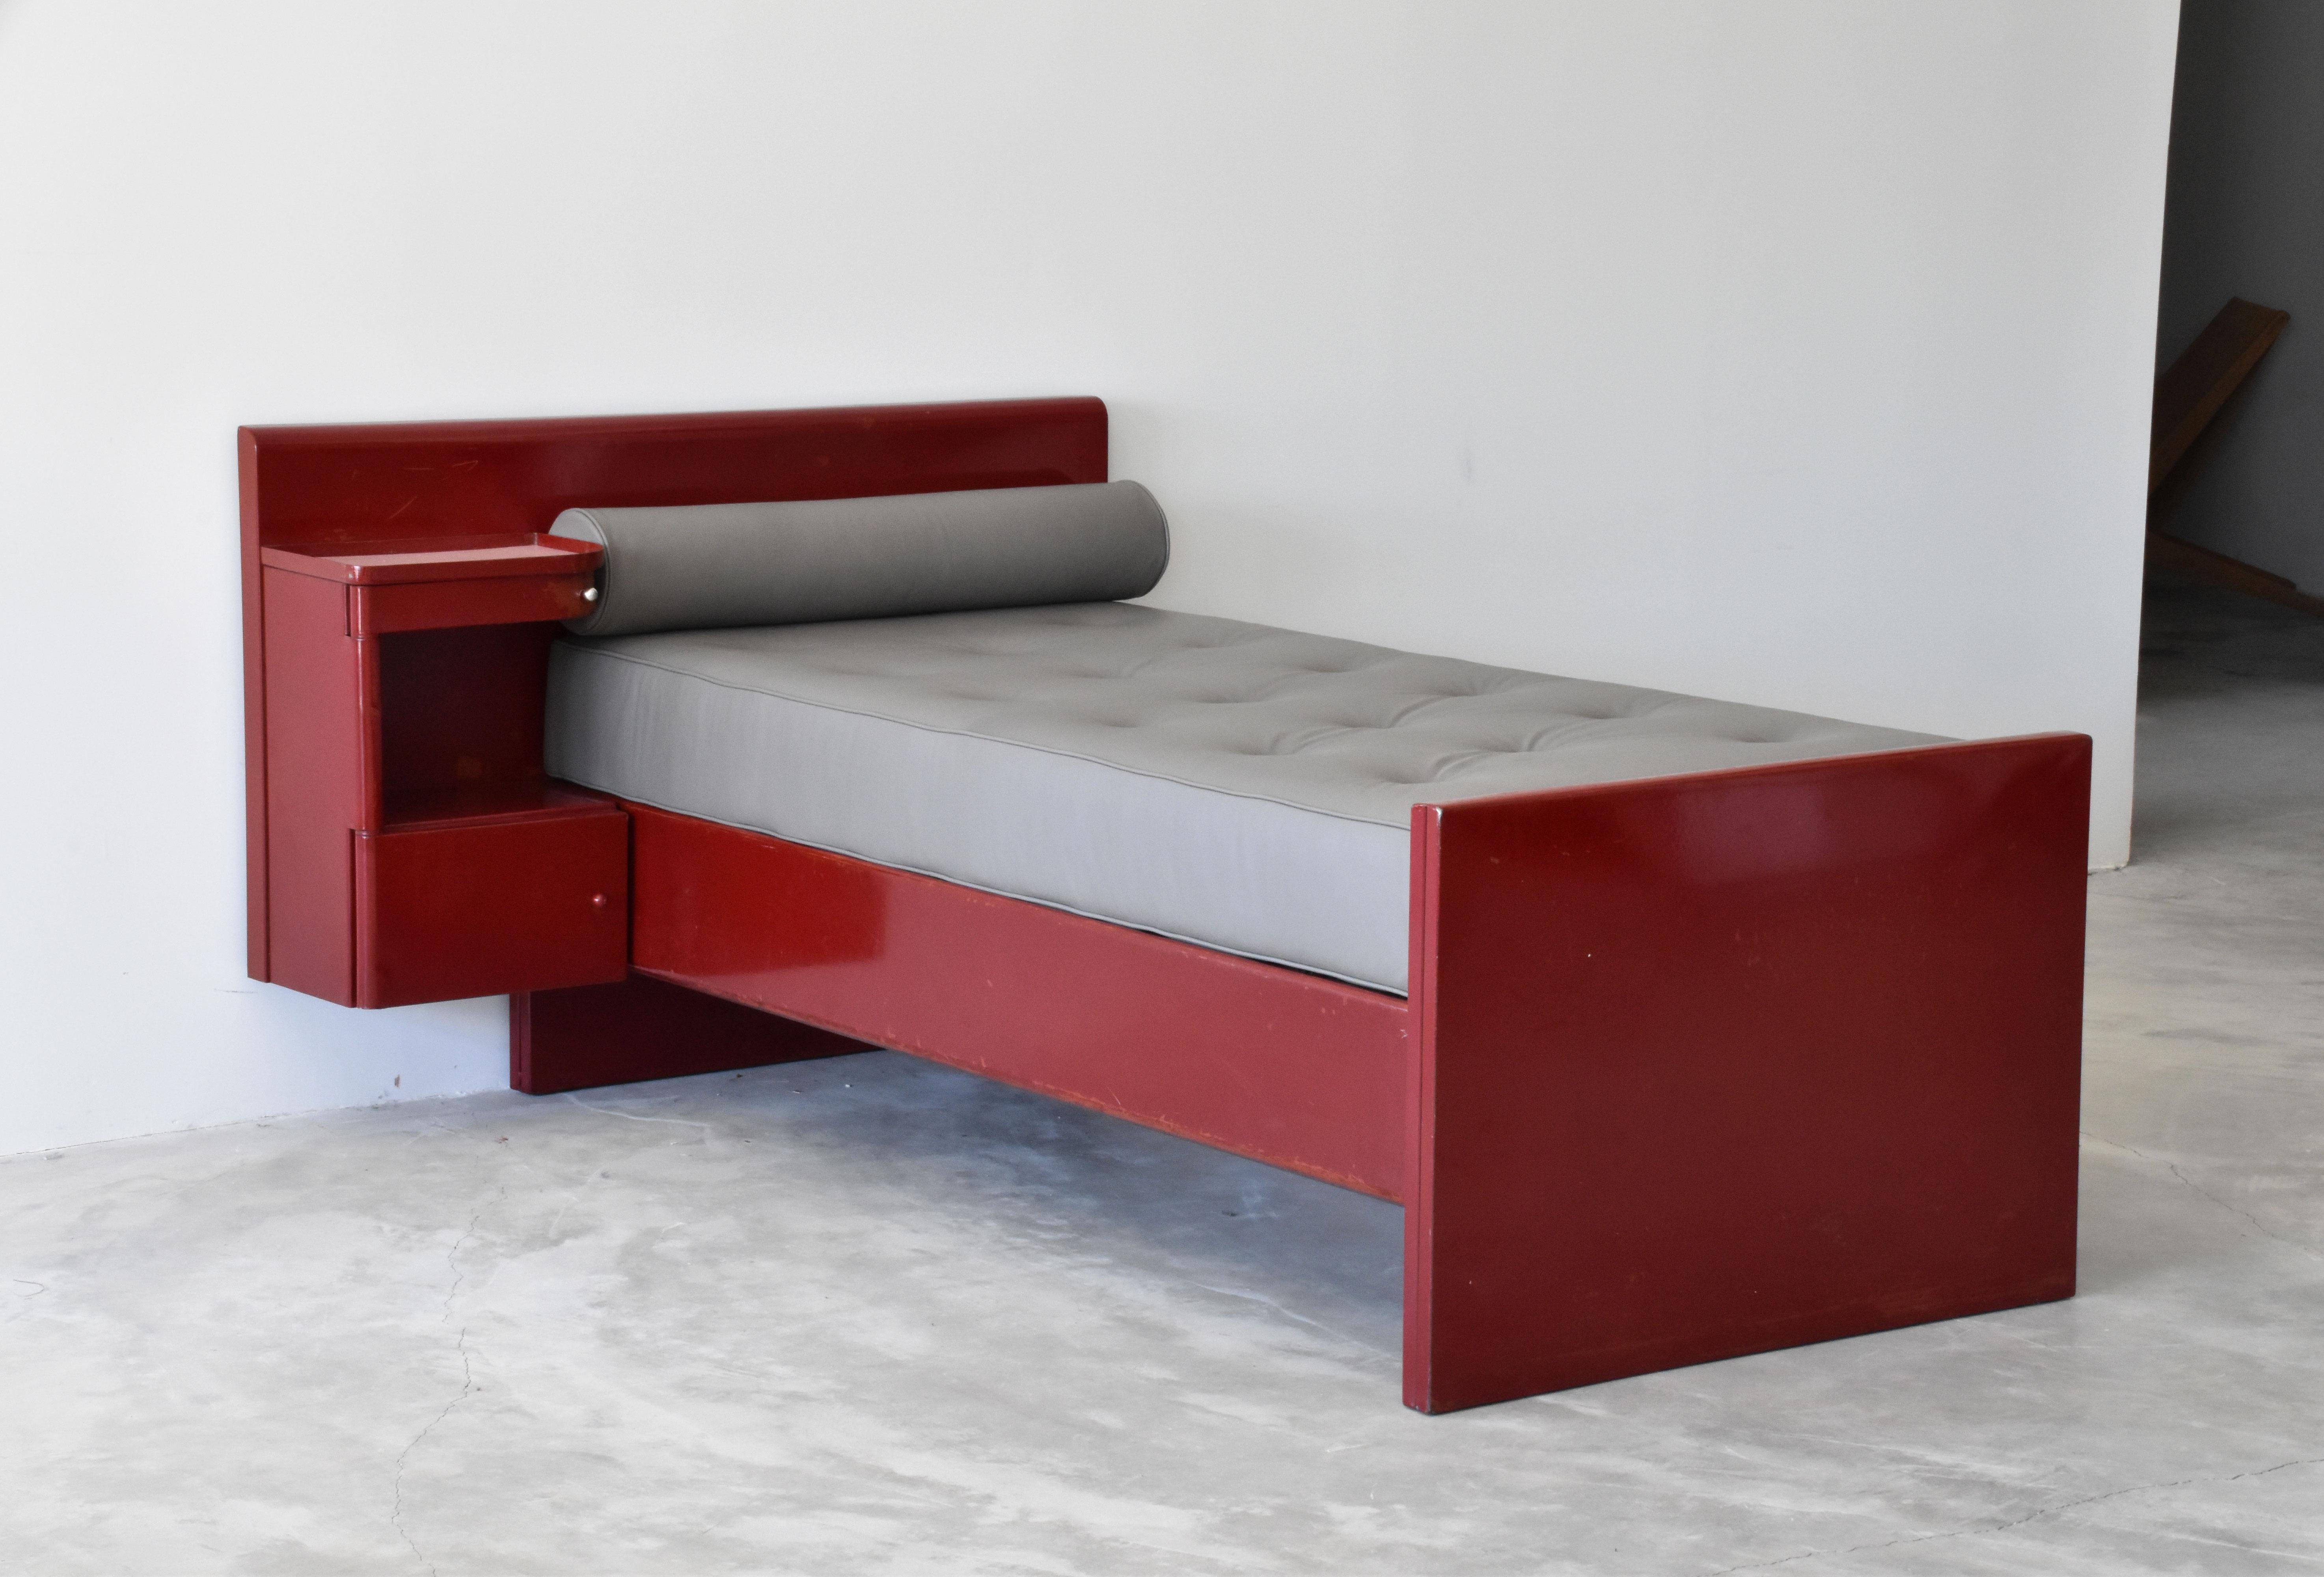 An early functionalist daybed designed by Jean Prouvé & Jules Leleu, from their iconic commission for Sanatorium Martel de Janville, Plateau d'Assy, France. The daybed features a built-in side cabinet. 

Secondary cushions upholstered in dyed in